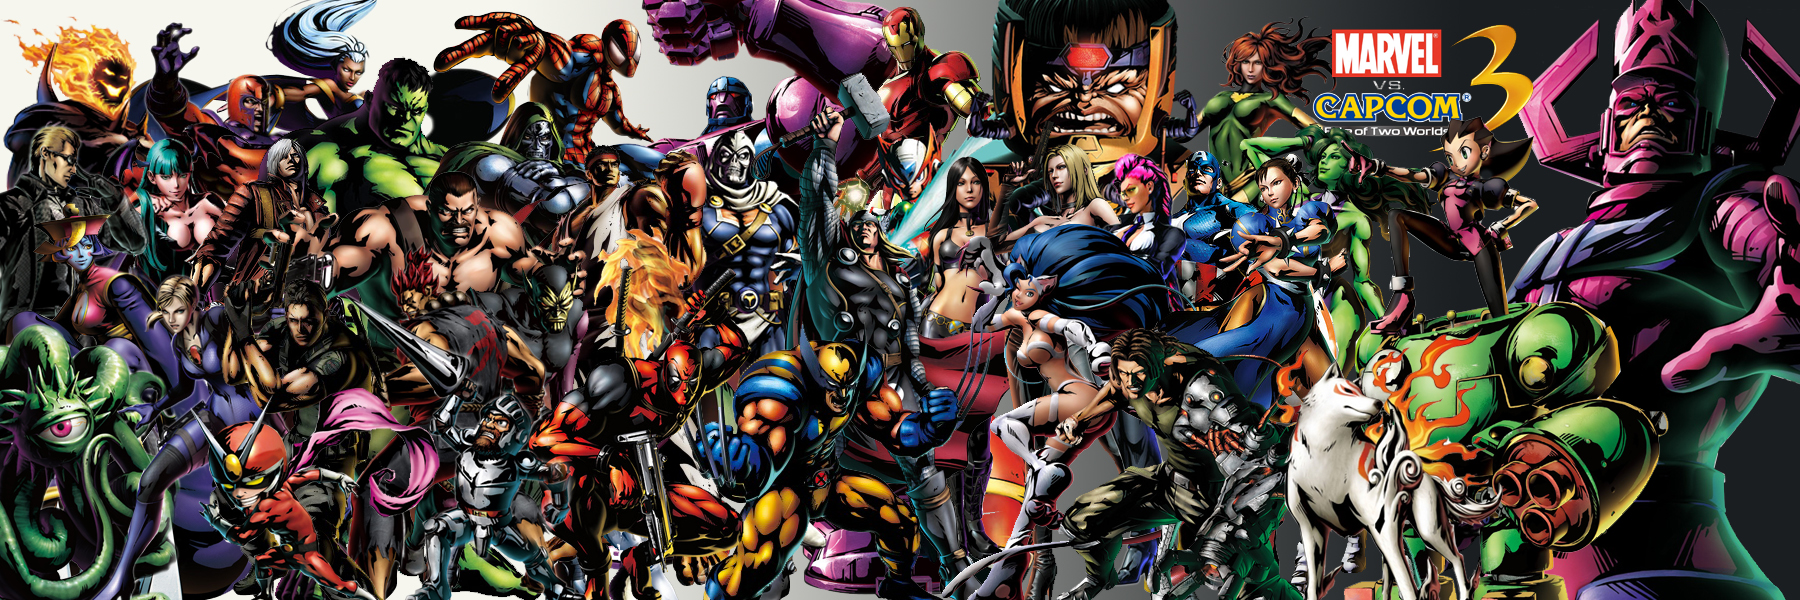 All Marvel Characters Vs